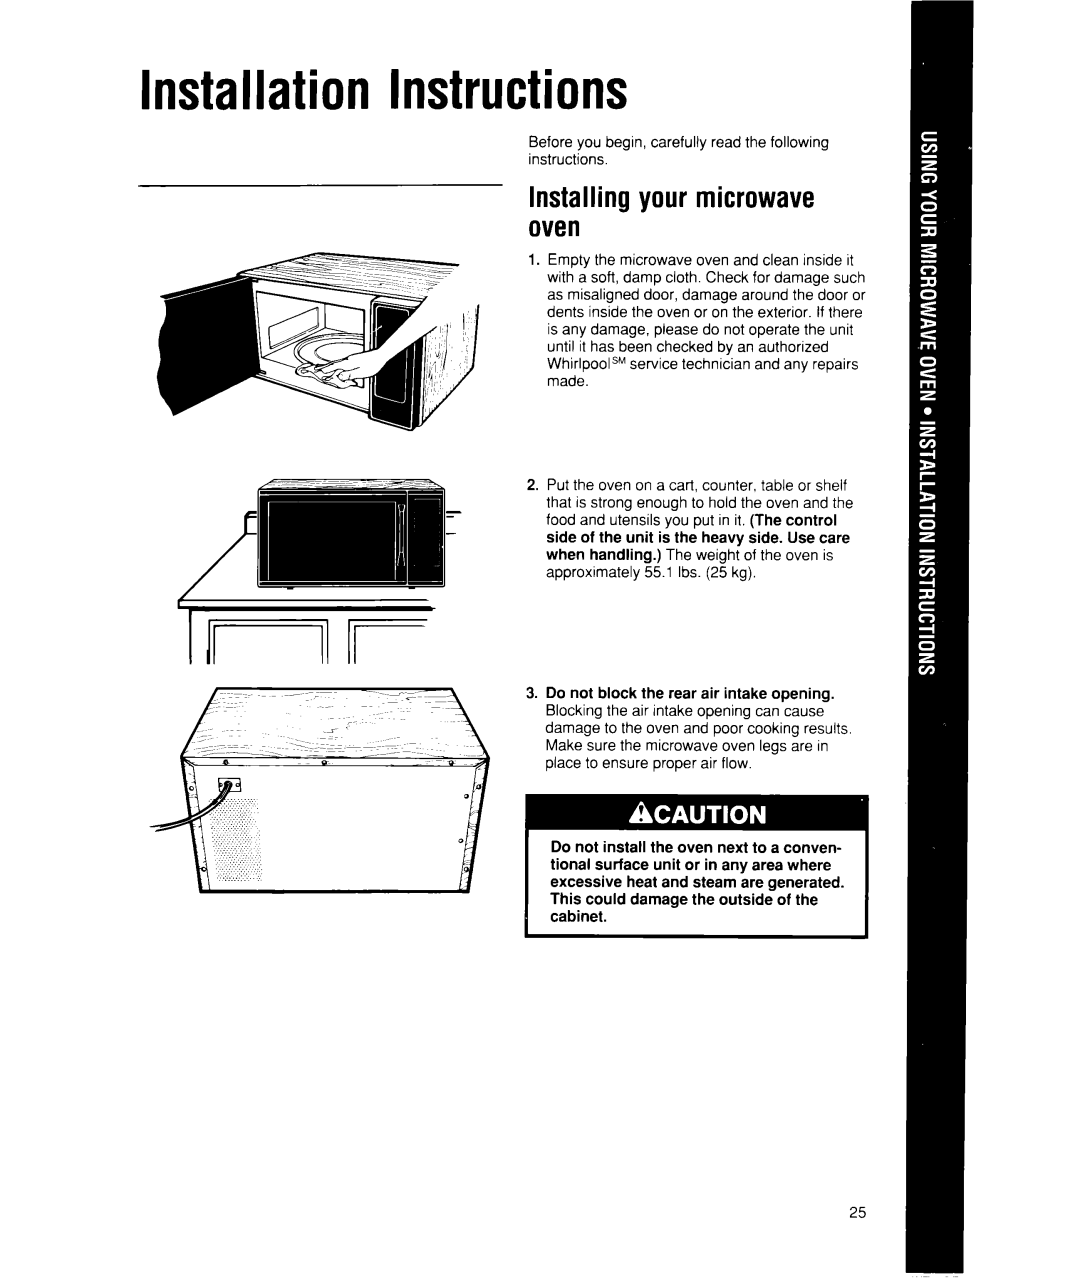 Whirlpool MW7400XW manual Installation Instructions, Installing your microwave oven 